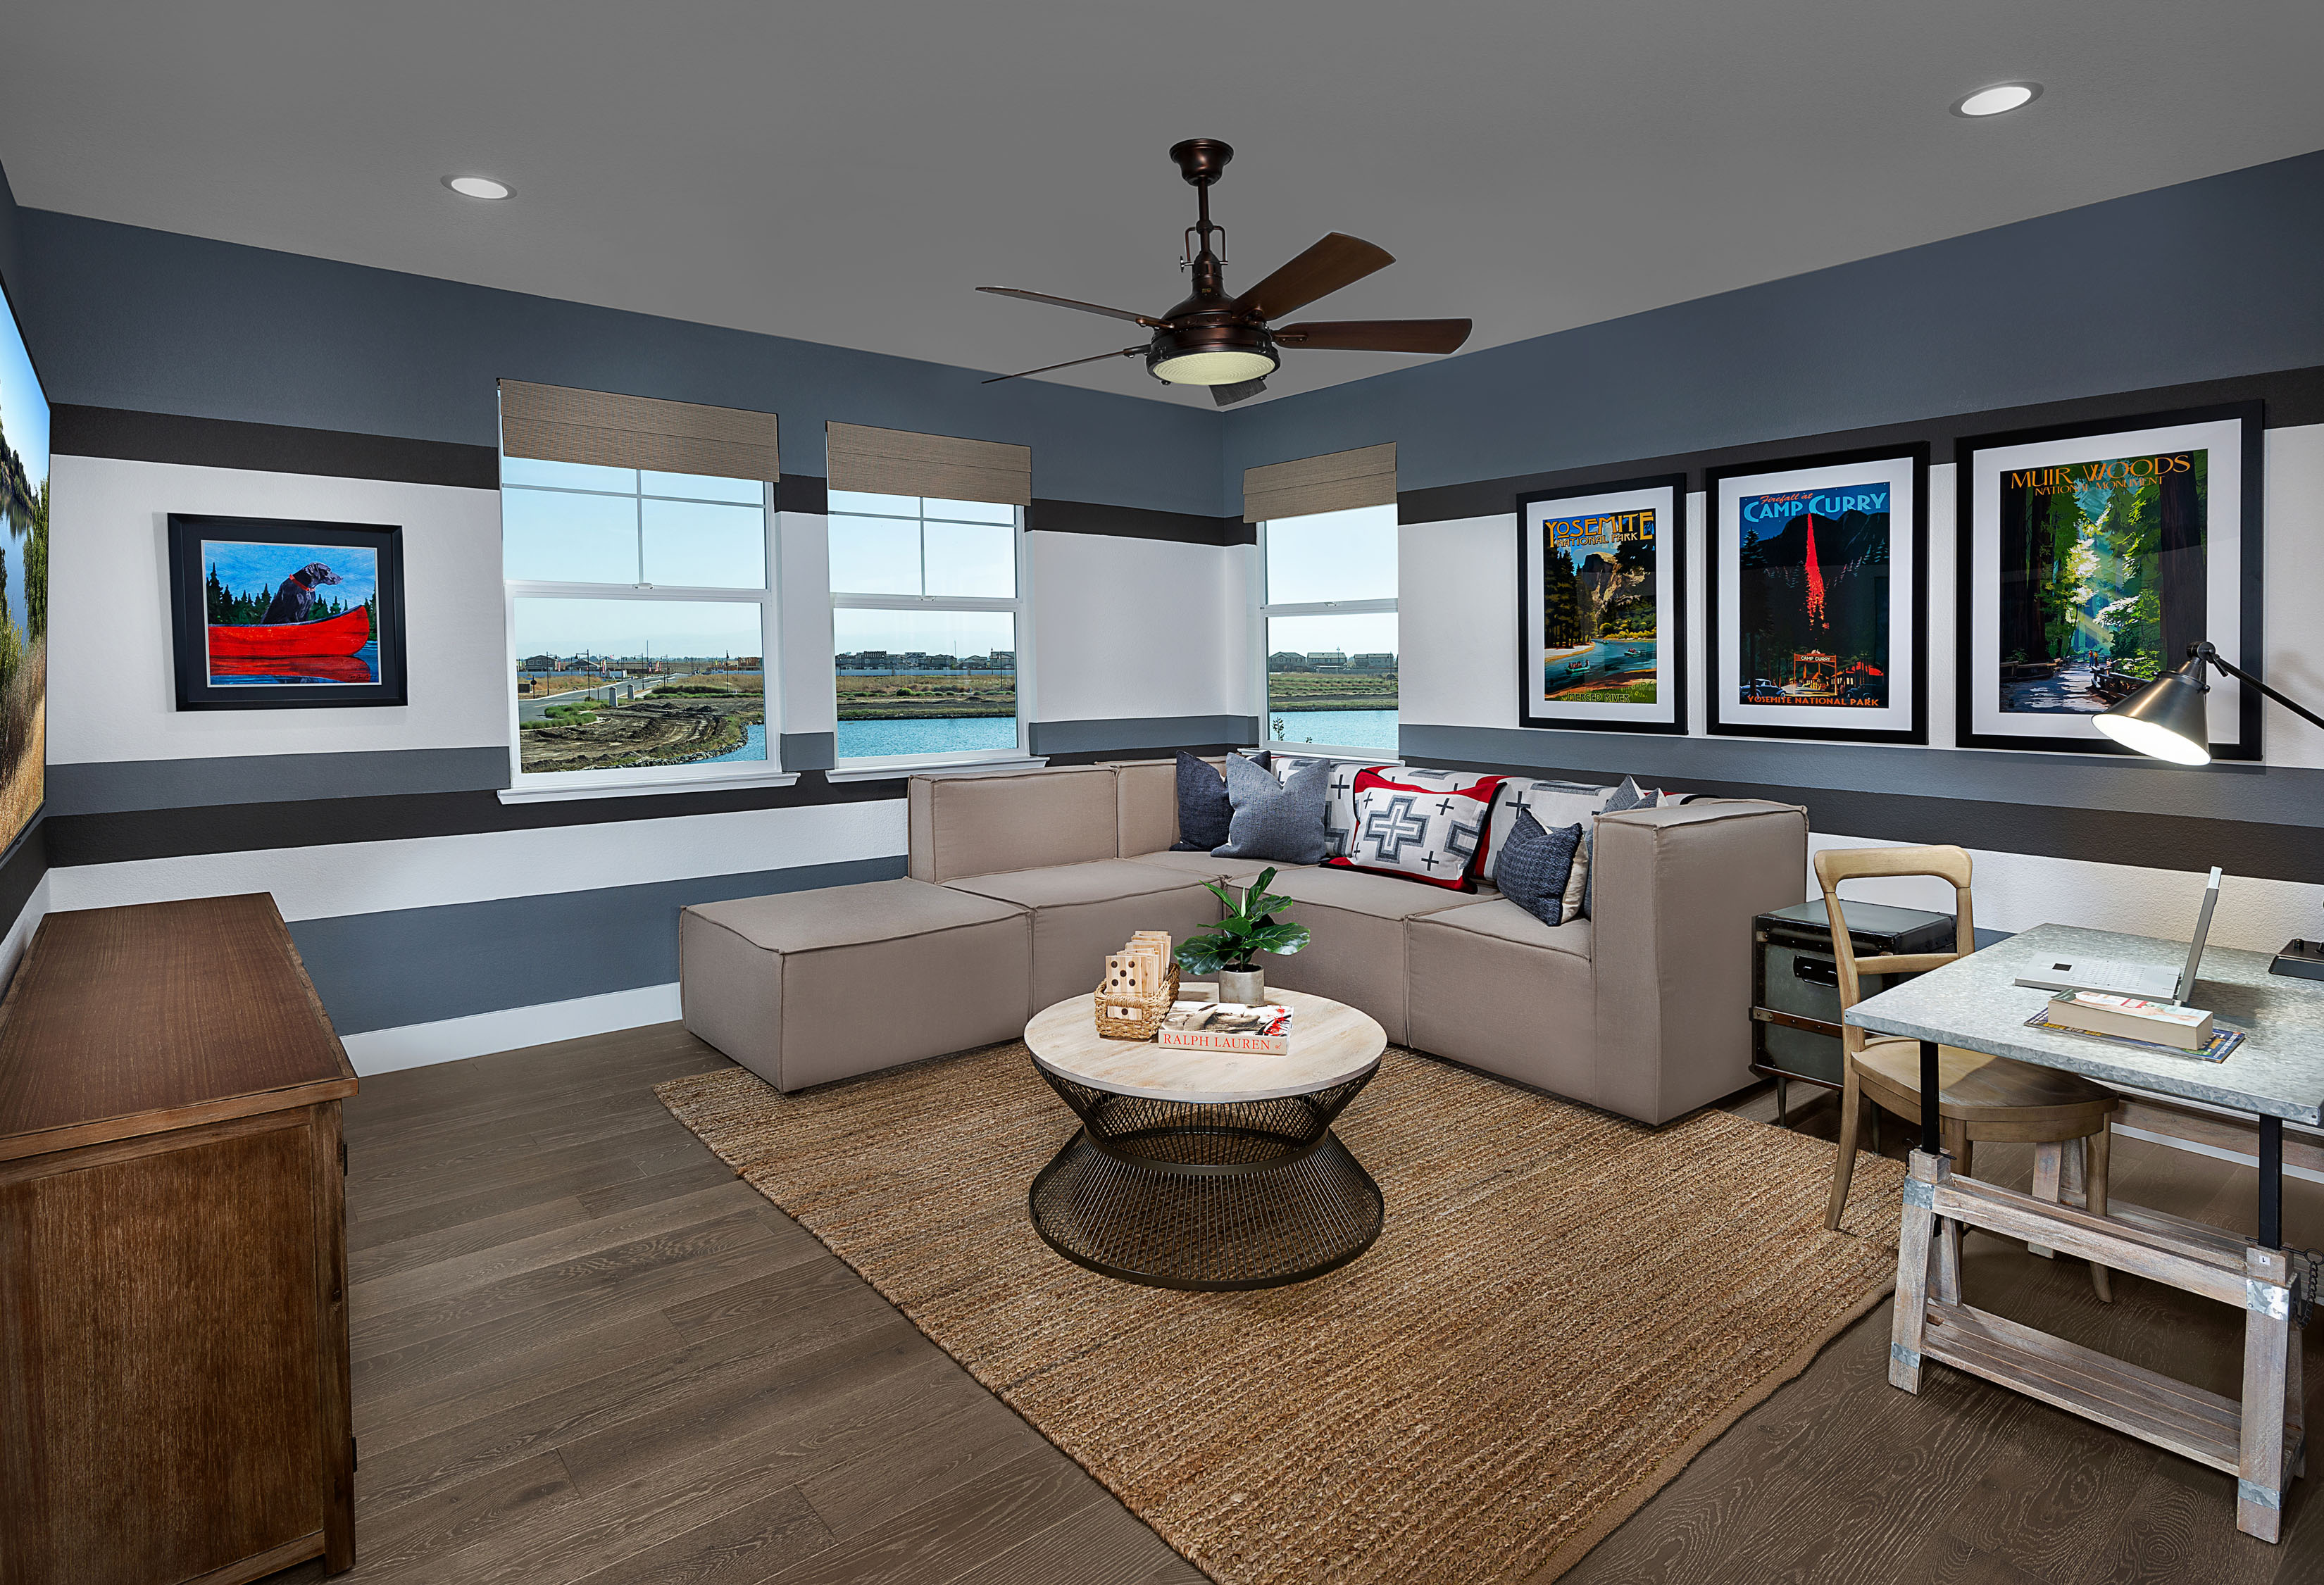 Move-In Ready New Lathrop Homes Available at Newport at River Islands